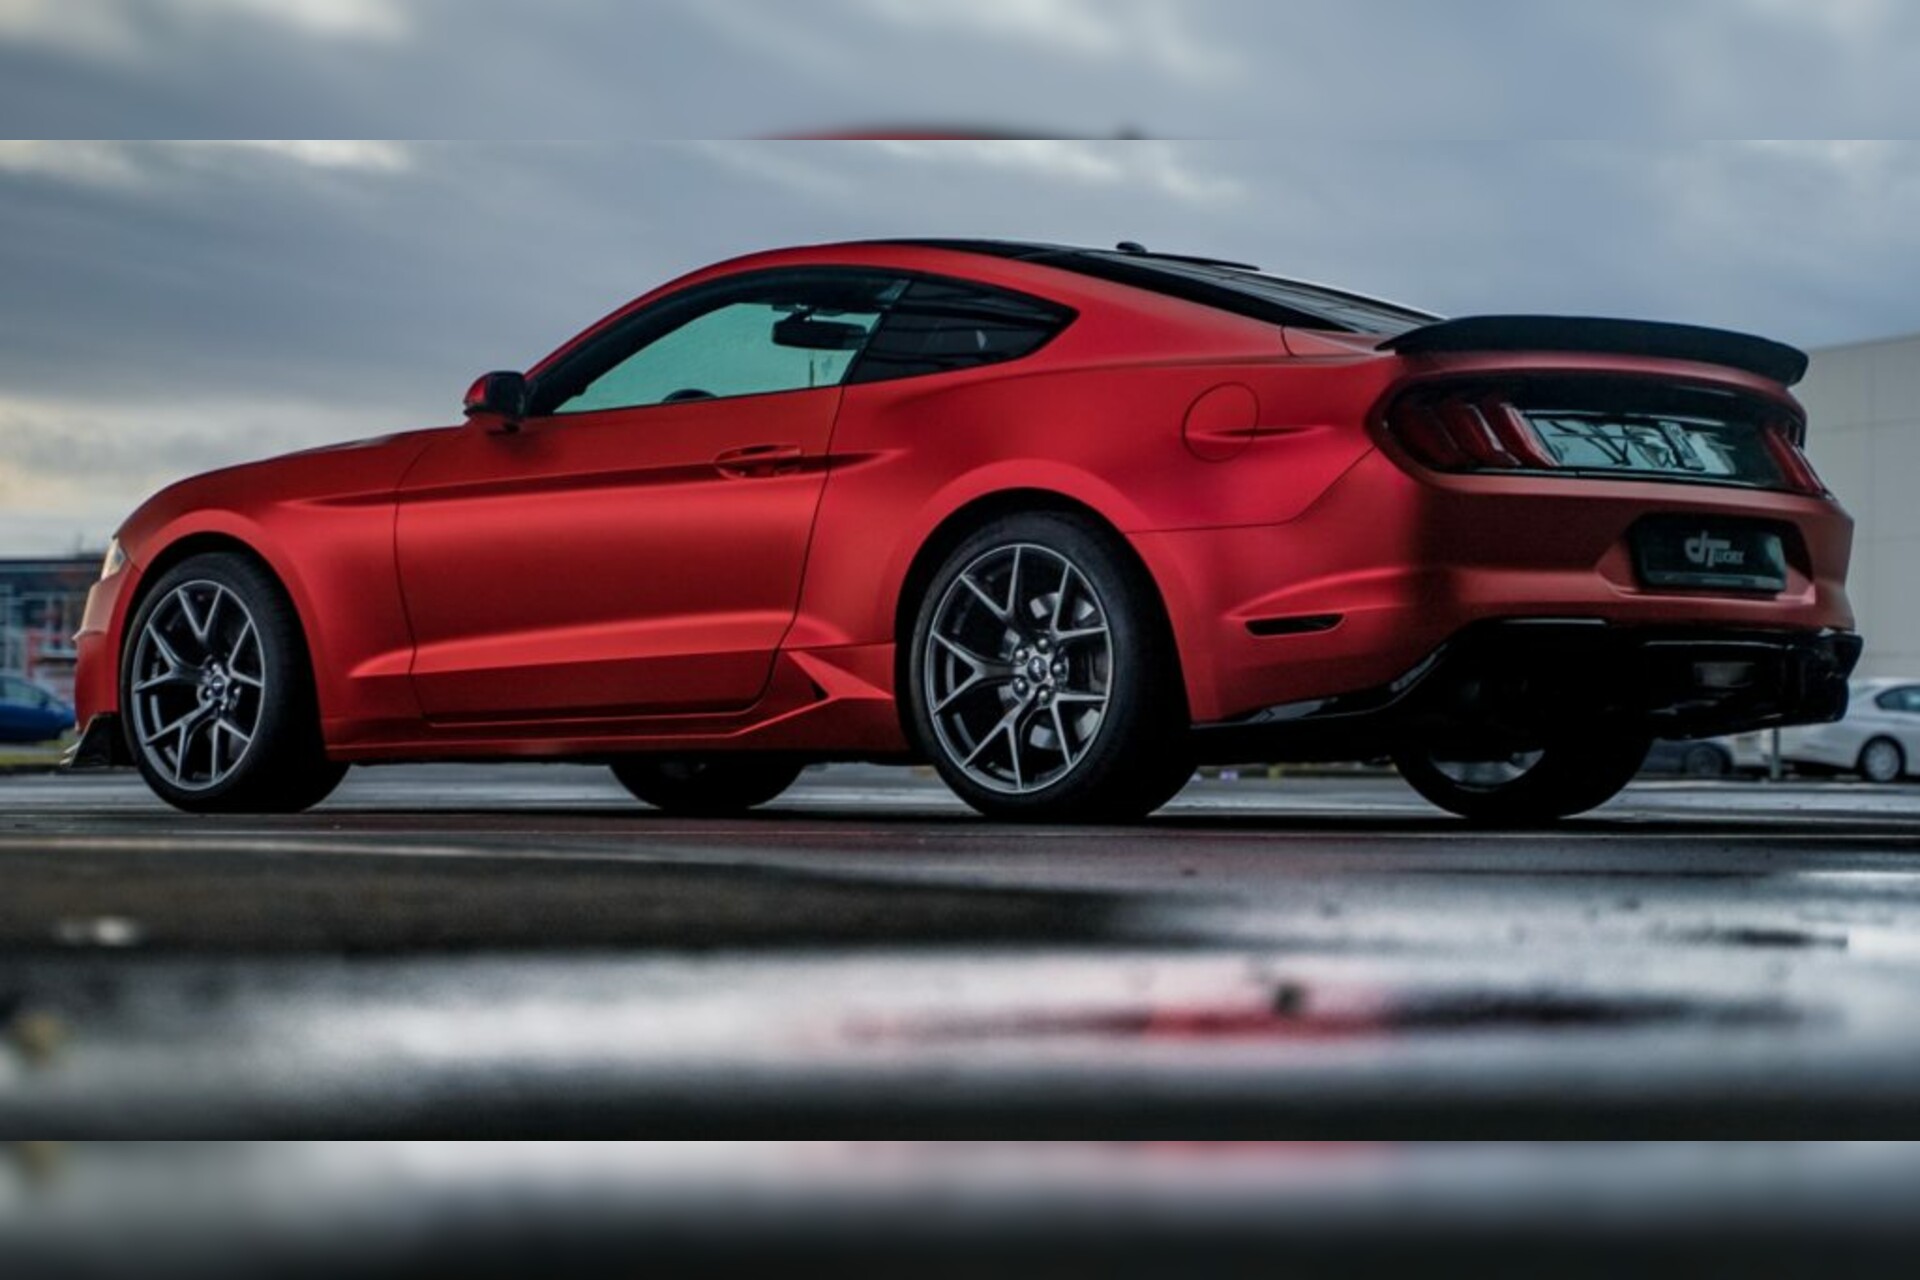 Ford Mustang GT Coupe mieten